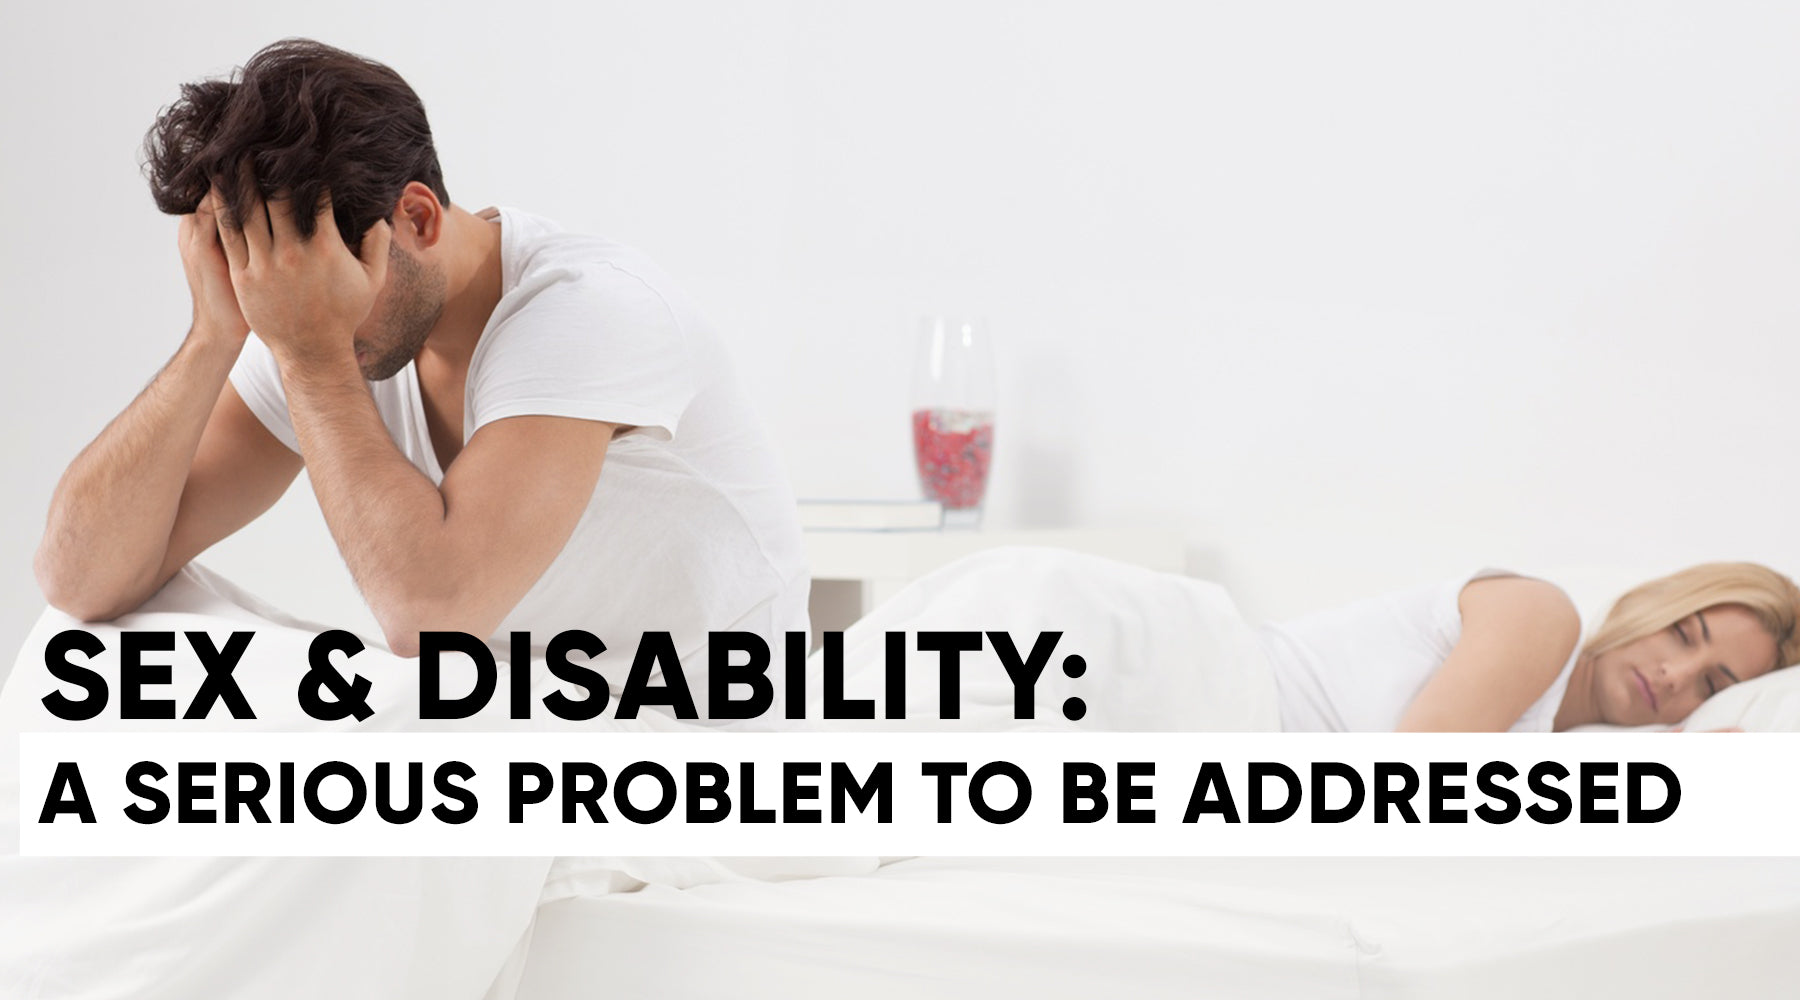 SEX &amp; DISABILITY: A SERIOUS PROBLEM TO BE ADDRESSED